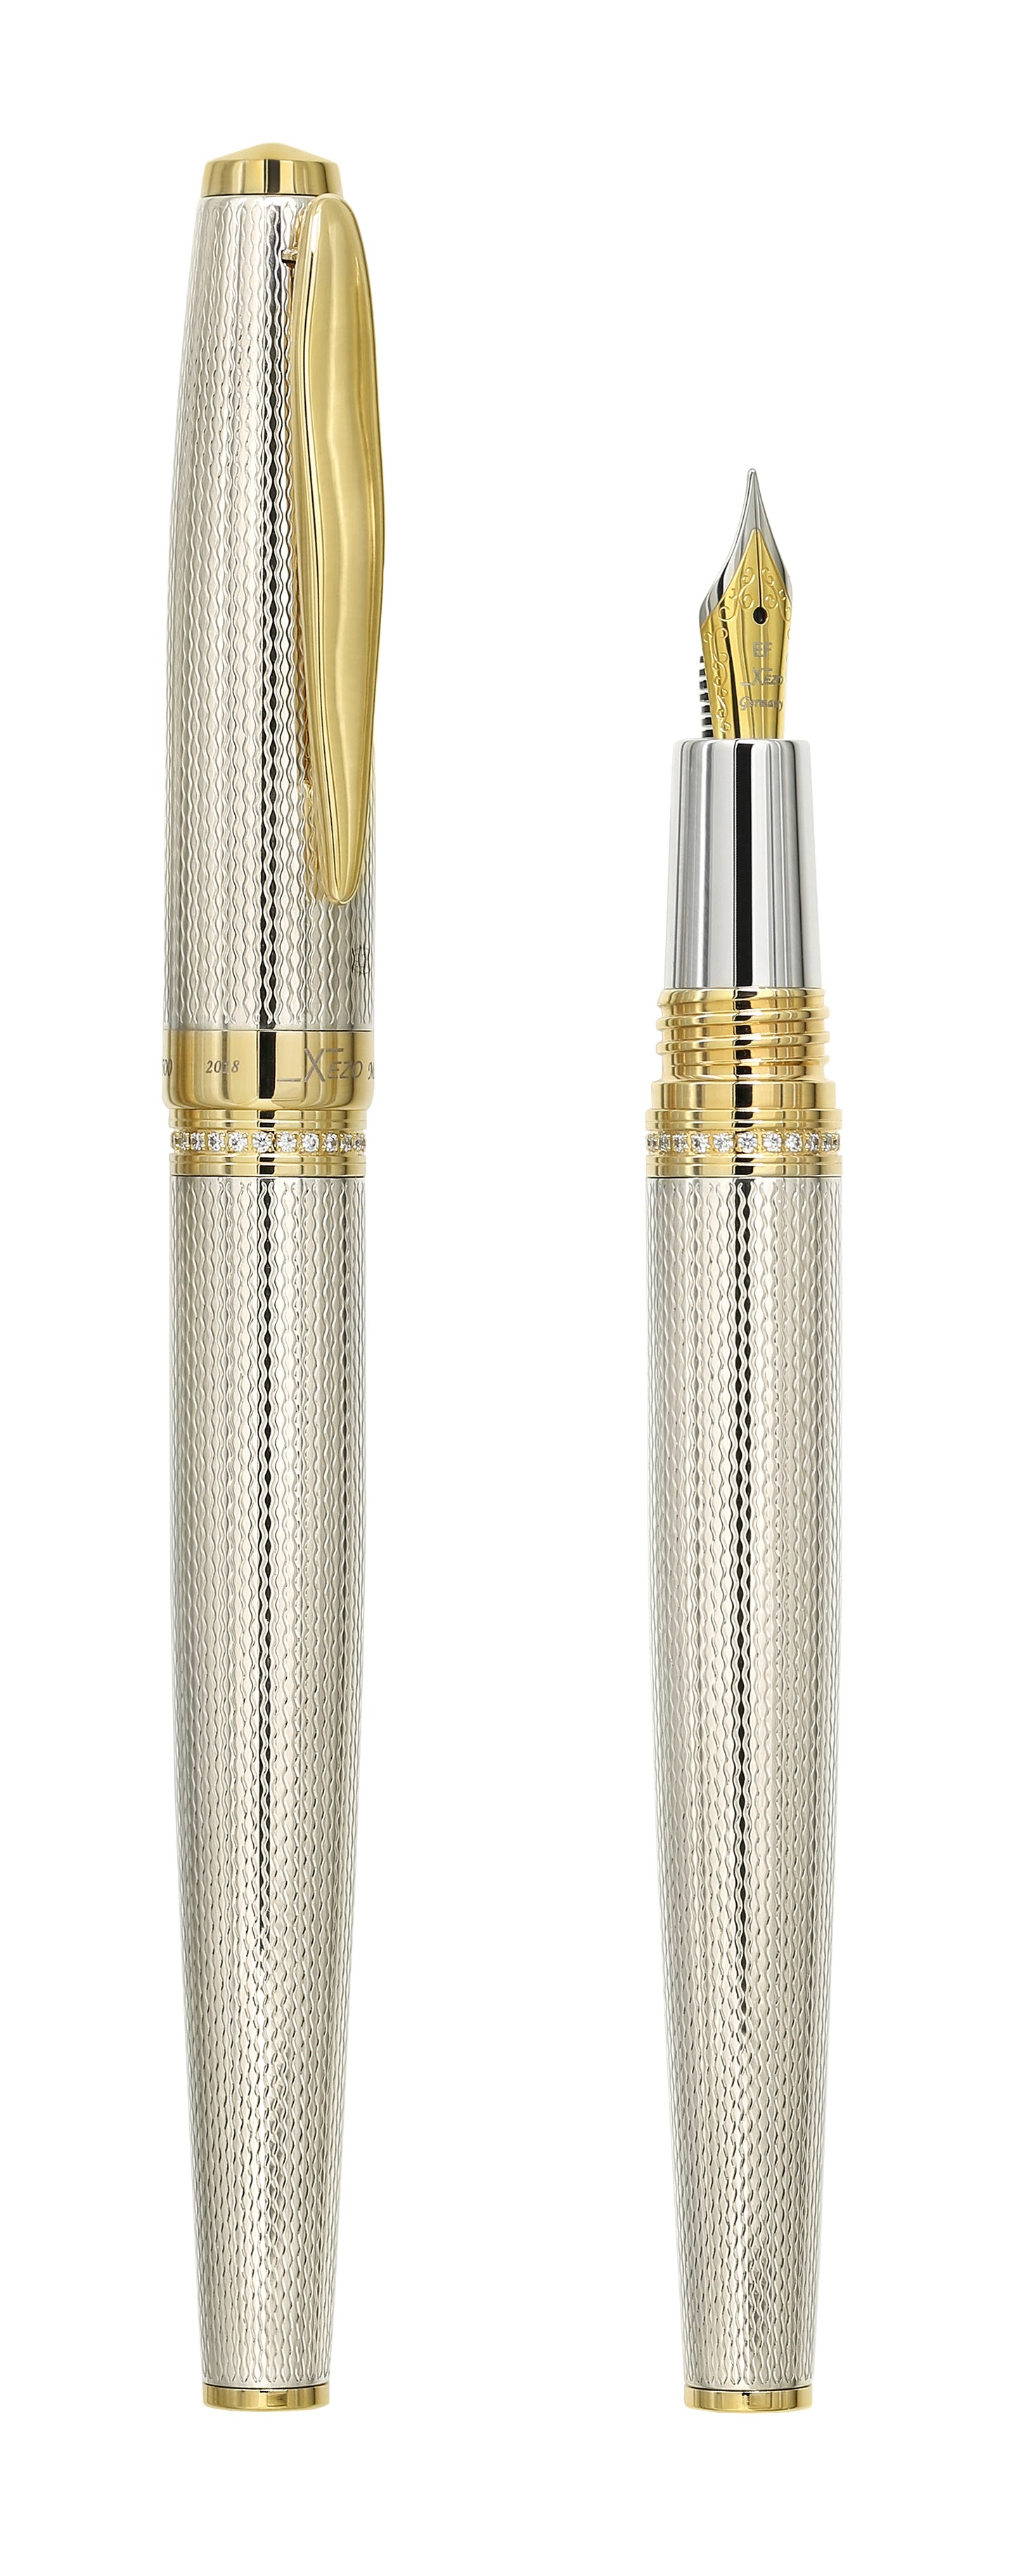 Xezo - Comparison between the angled view of the side of capped and uncapped Maestro 925 Sterling Silver EF fountain pens